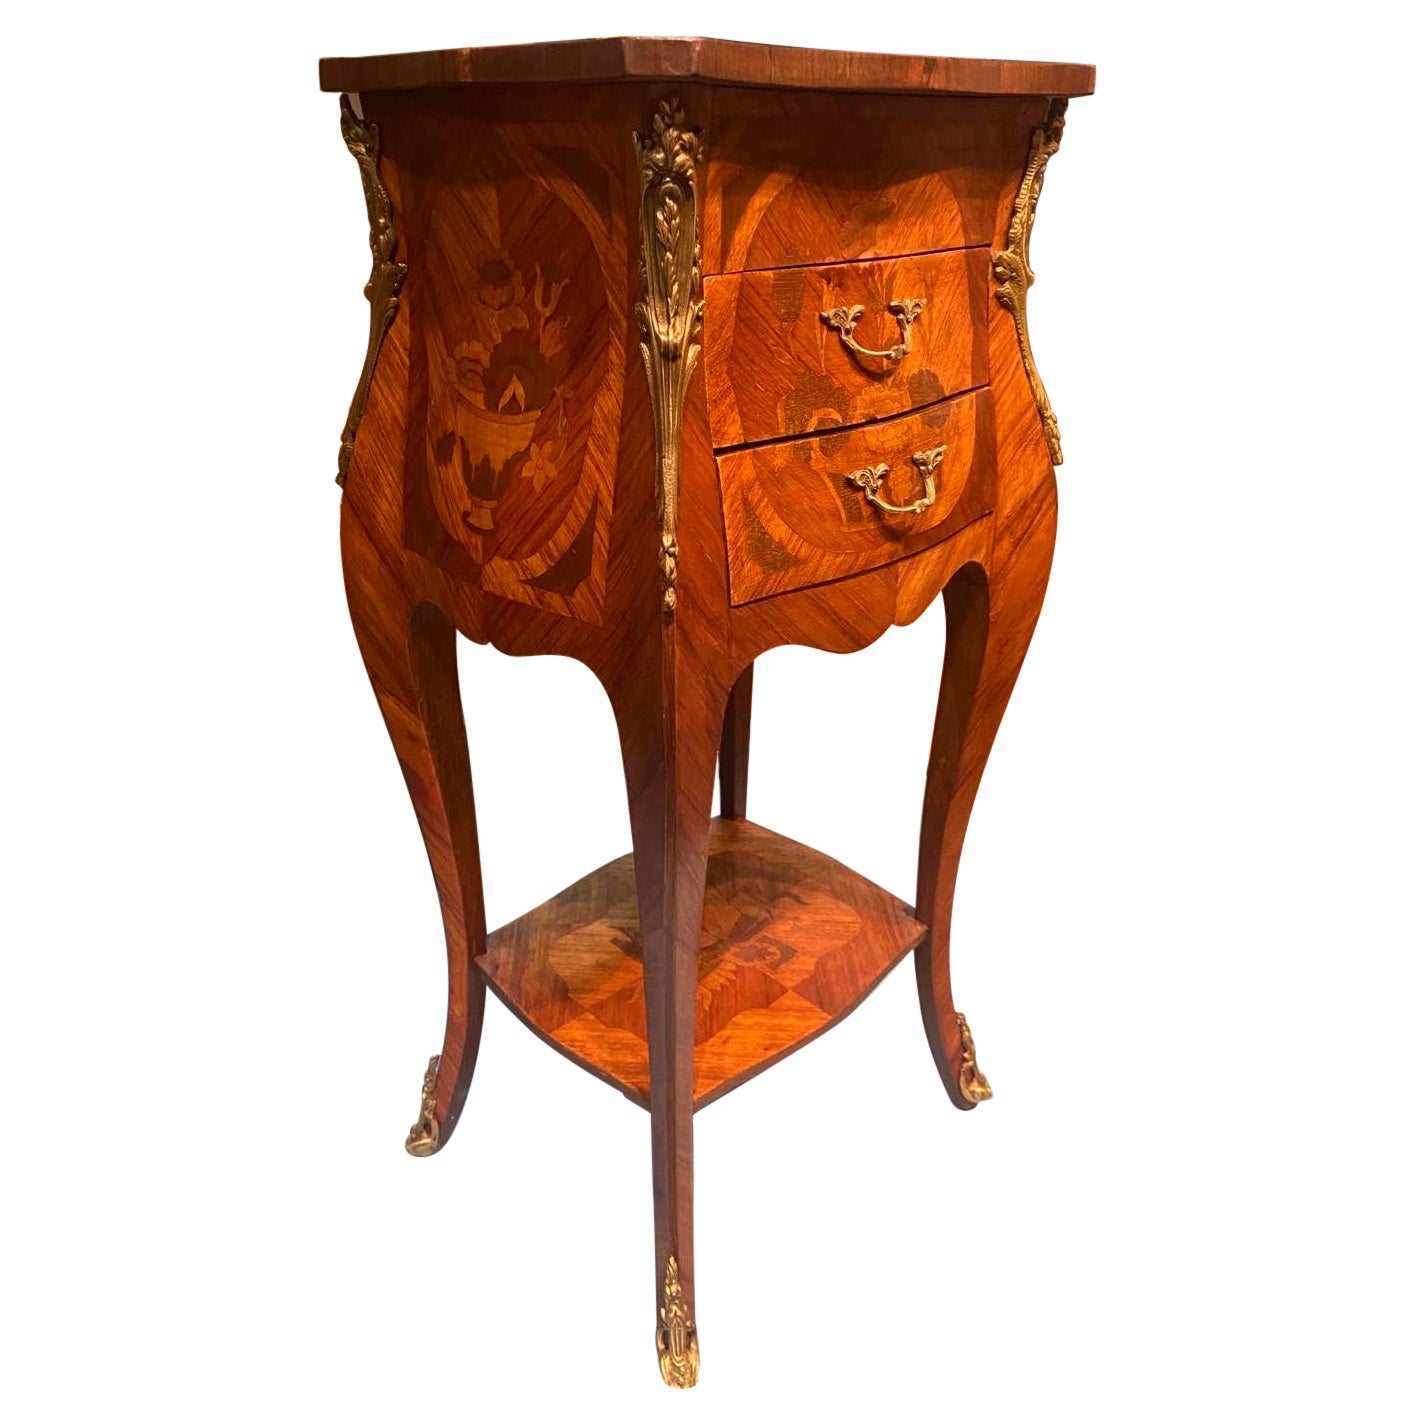 19th Century French Mahogany Inlaid Side Table with Drawers in Louis XVI Style